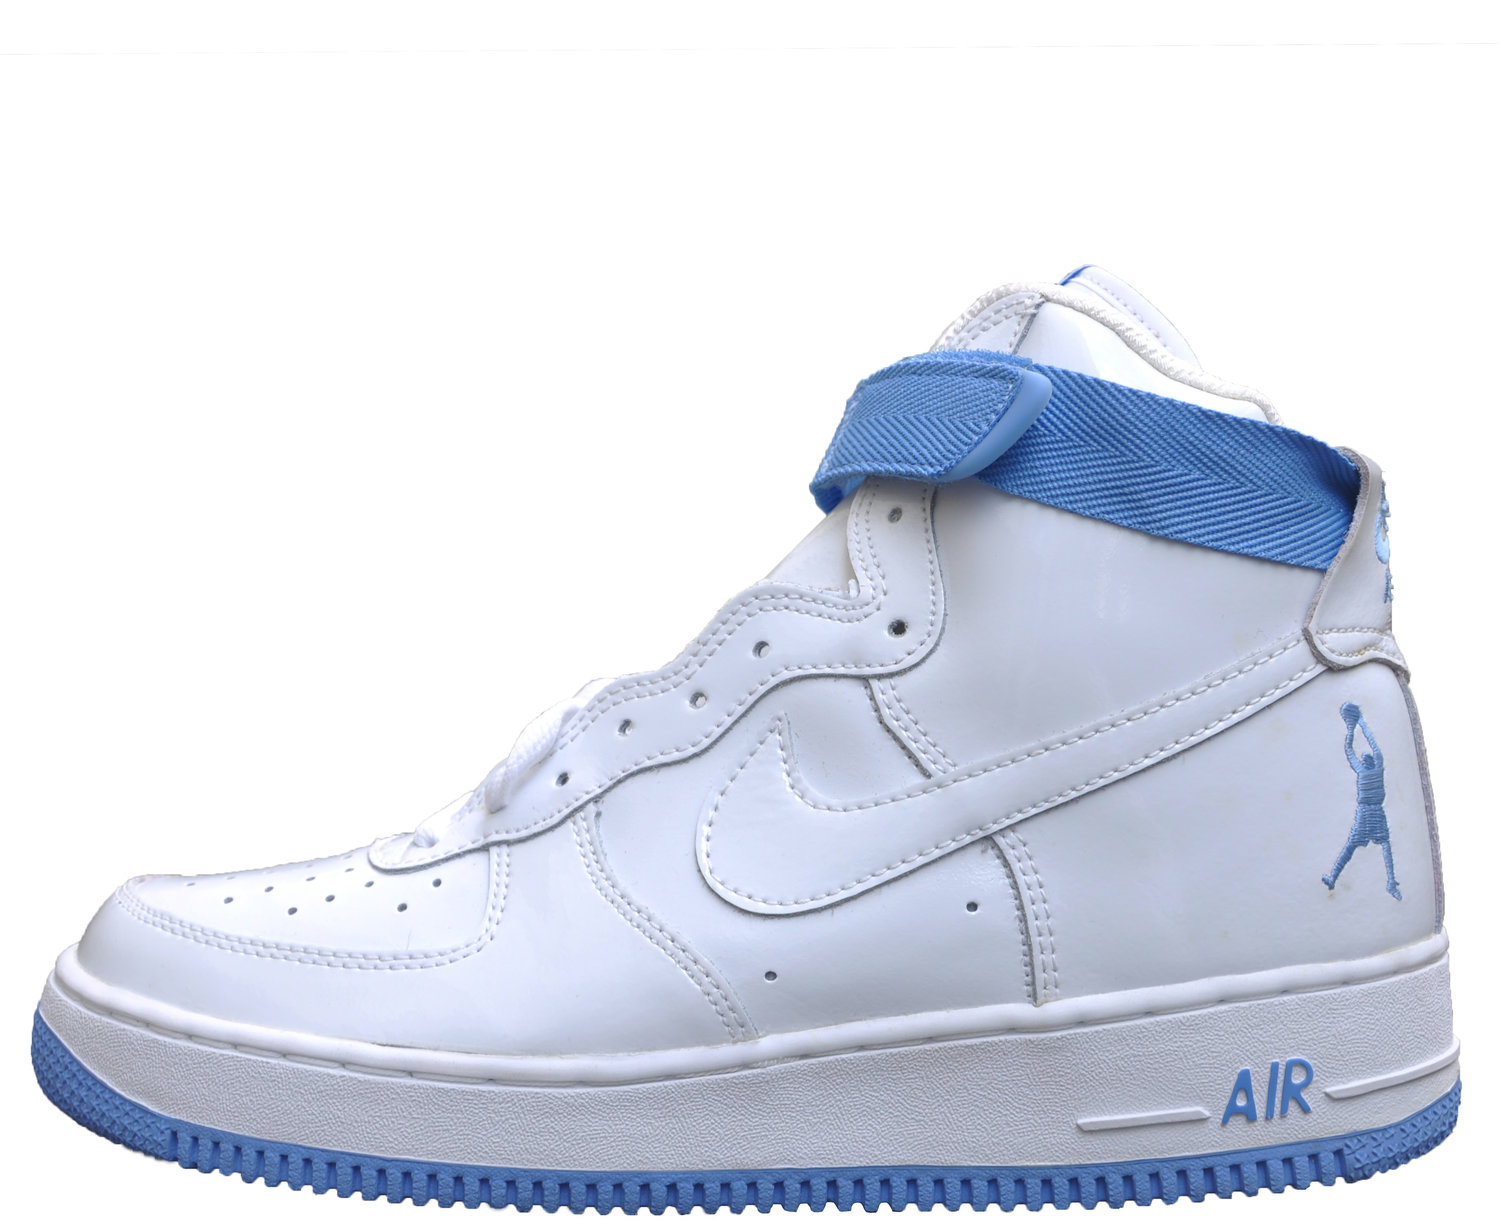 Nike Air Force 1 High Sheed White / University Blue (Size 10) DS 